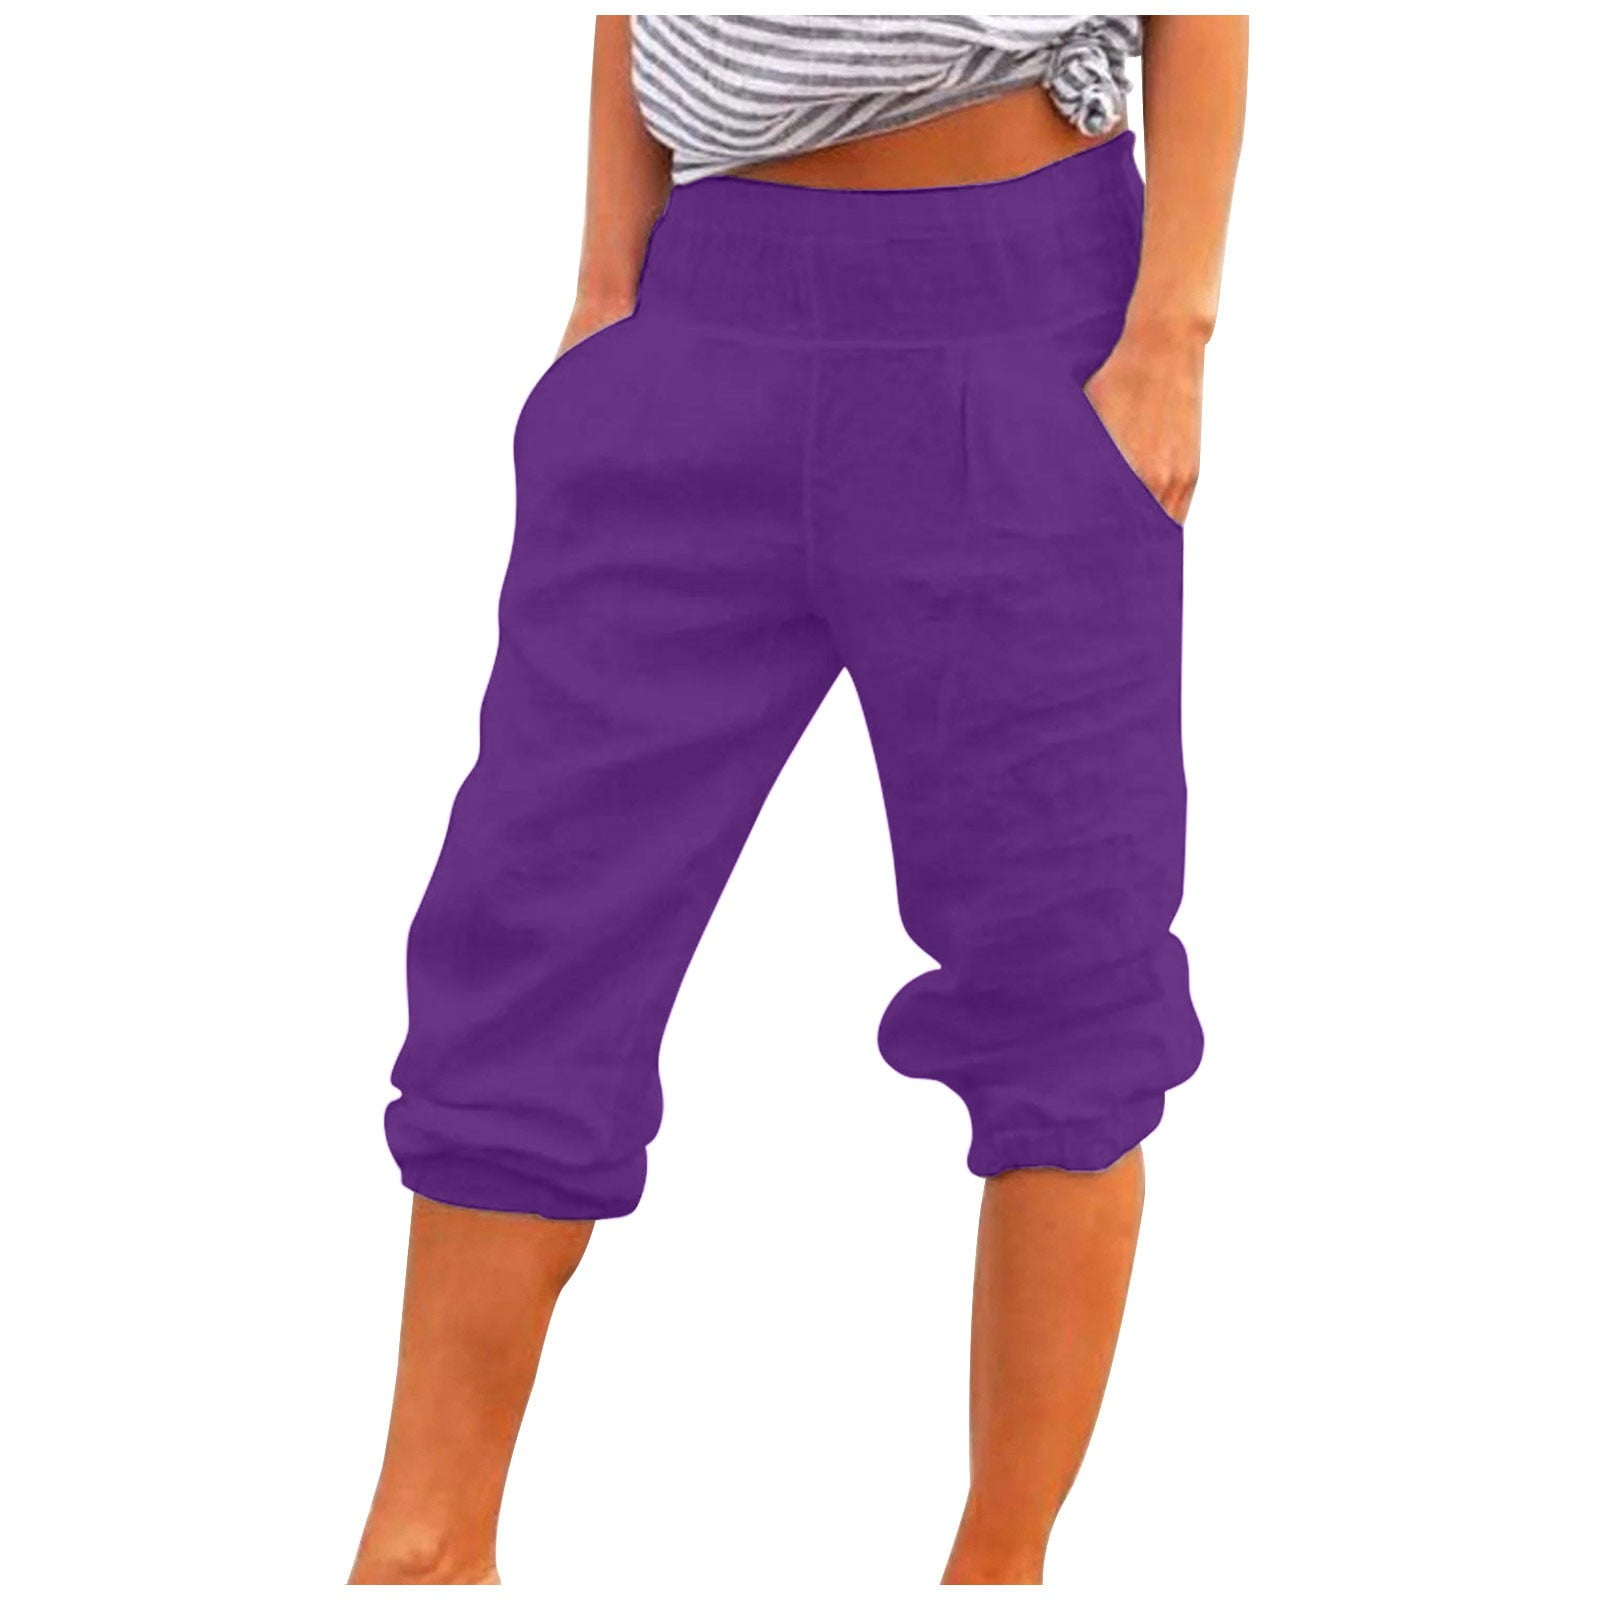 ATHLETA PURPLE FITTED Refective Capri Running Pants Womens Xl Excellent  Cond £3.94 - PicClick UK